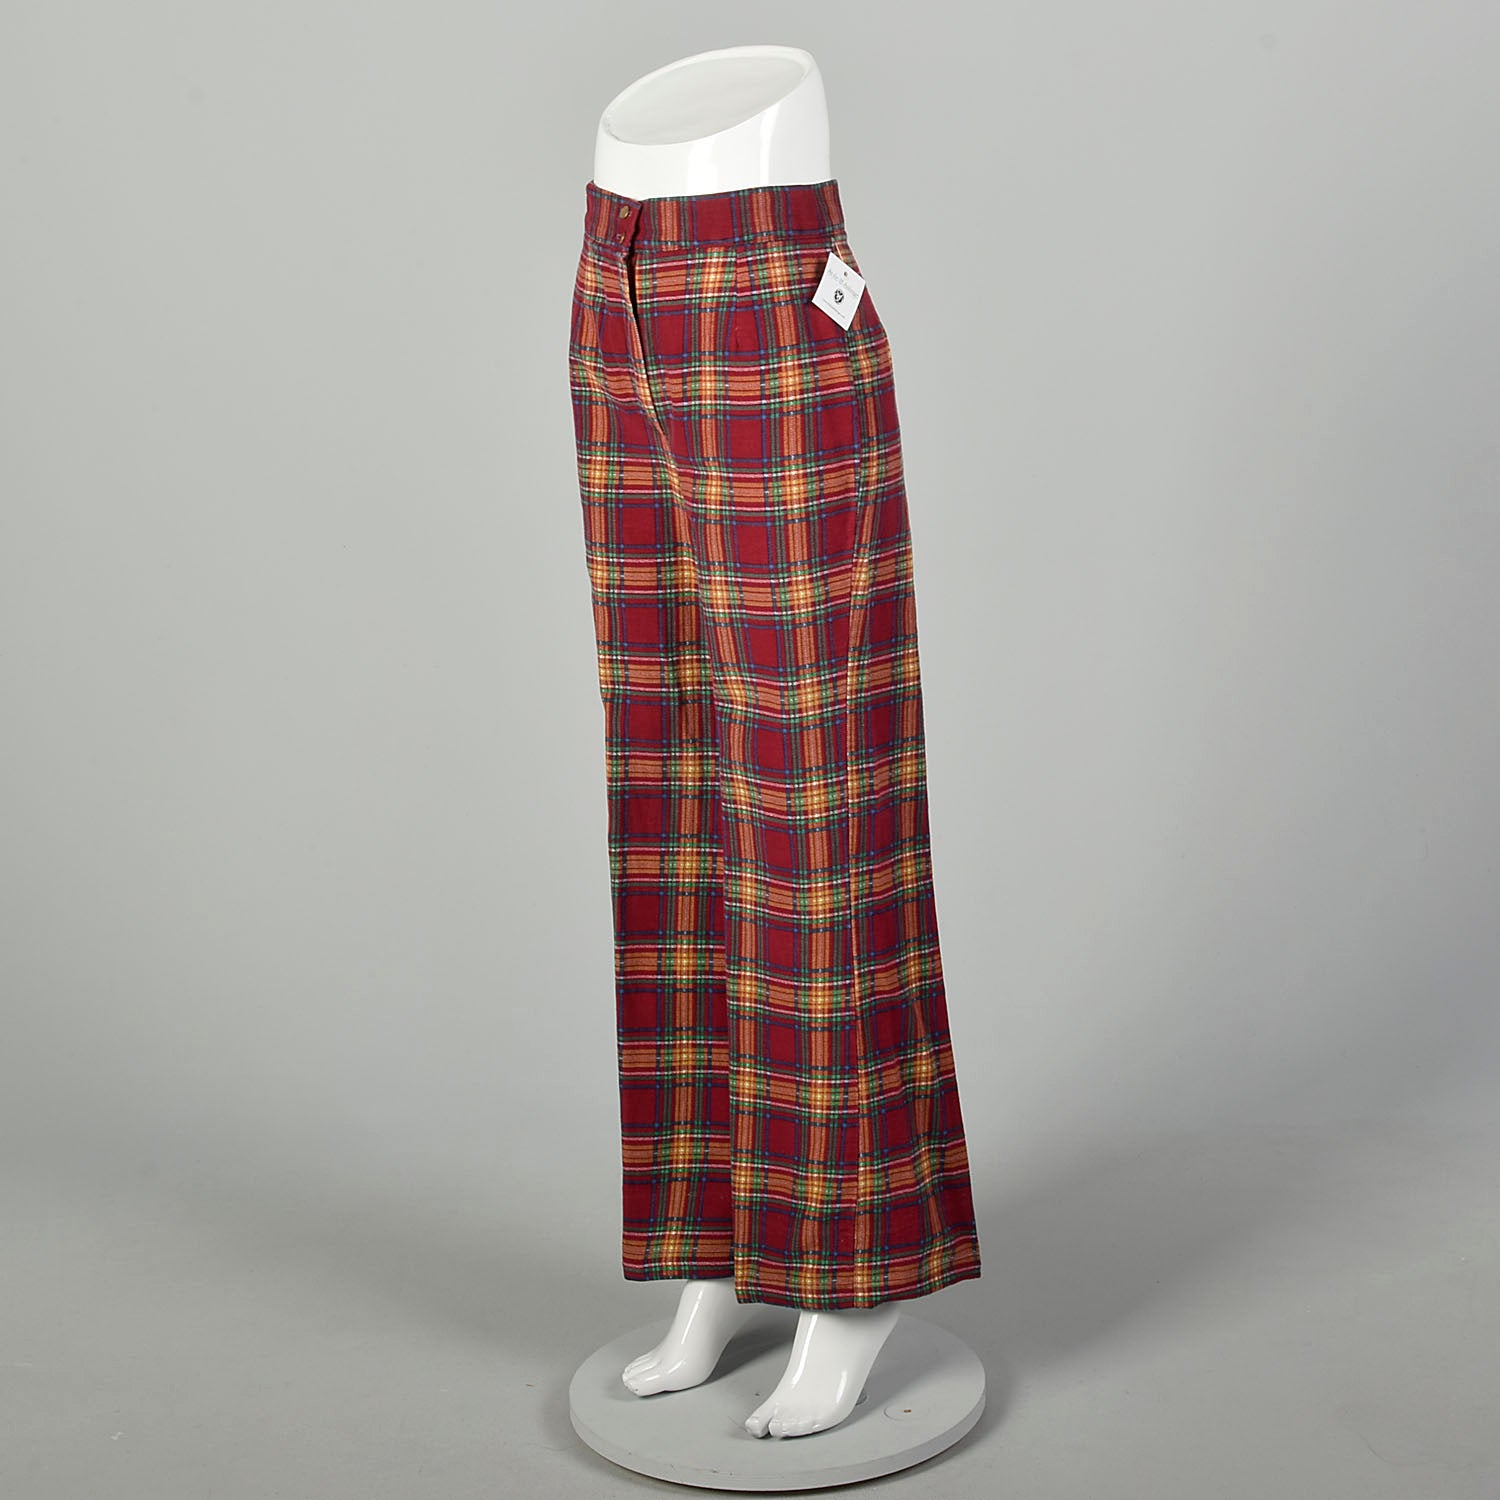 Small 1970s Flannel Bell Bottom Pants Plaid Wide Leg Jeans